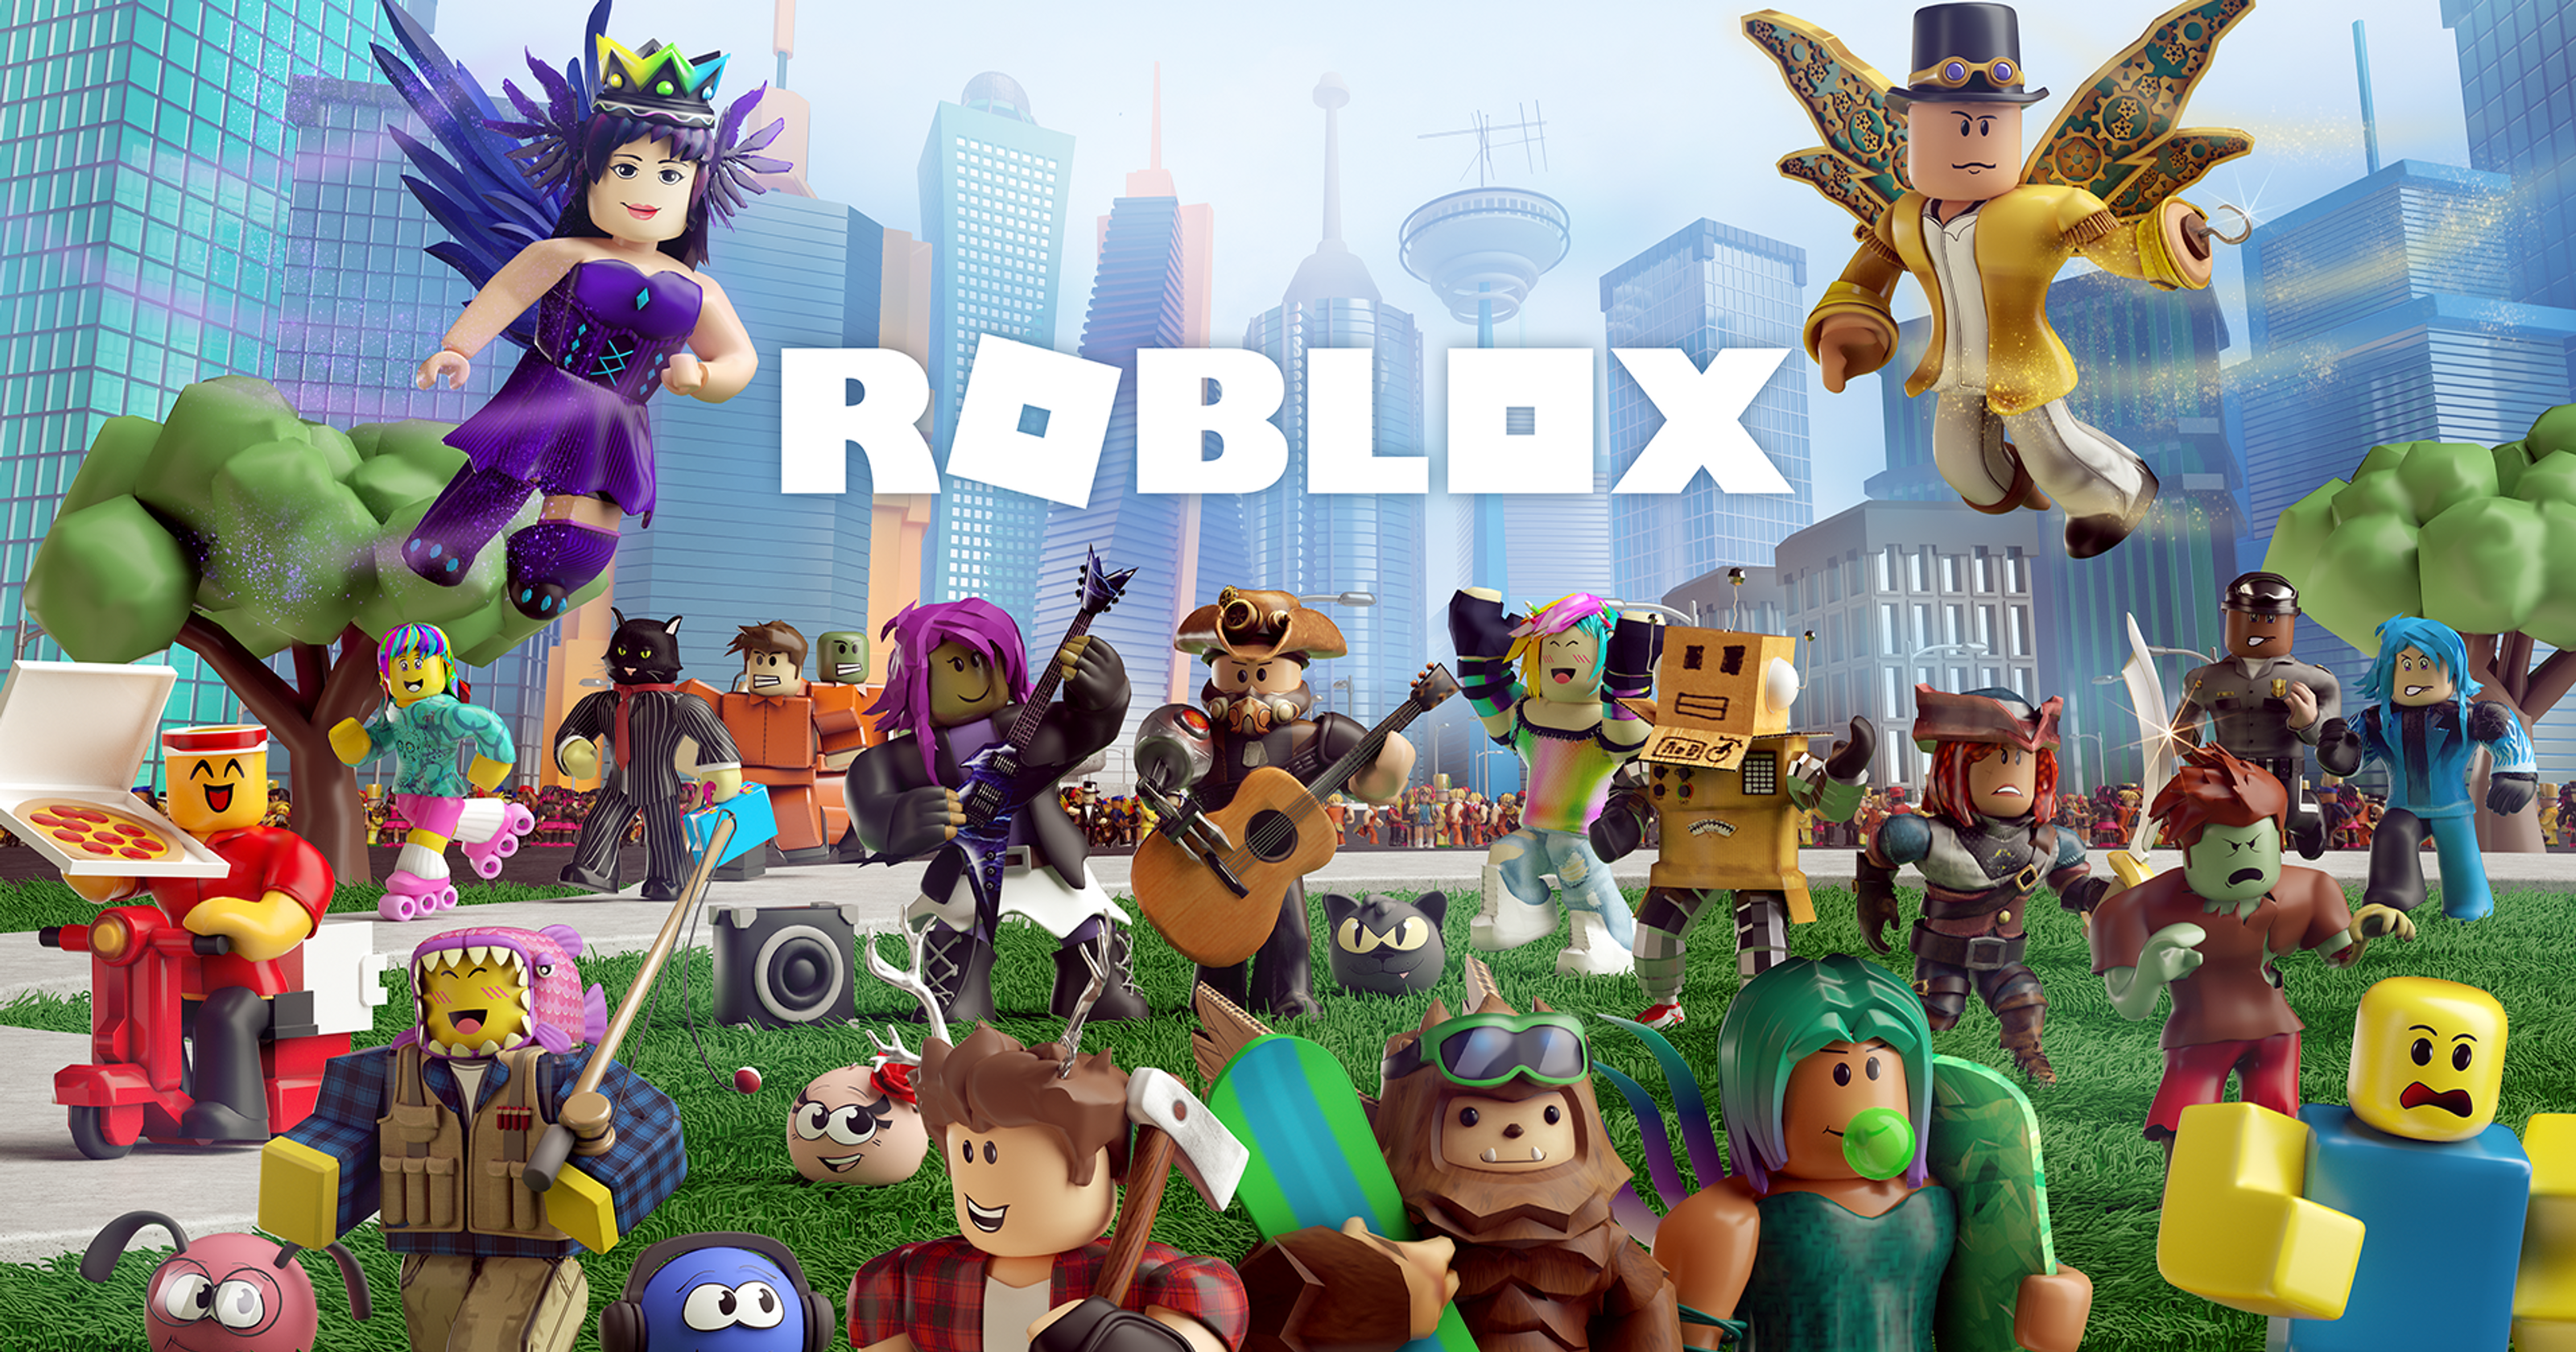 Advanced Roblox Game Scripting Summer Camp 10 Aug 2020 - and roblox scripting